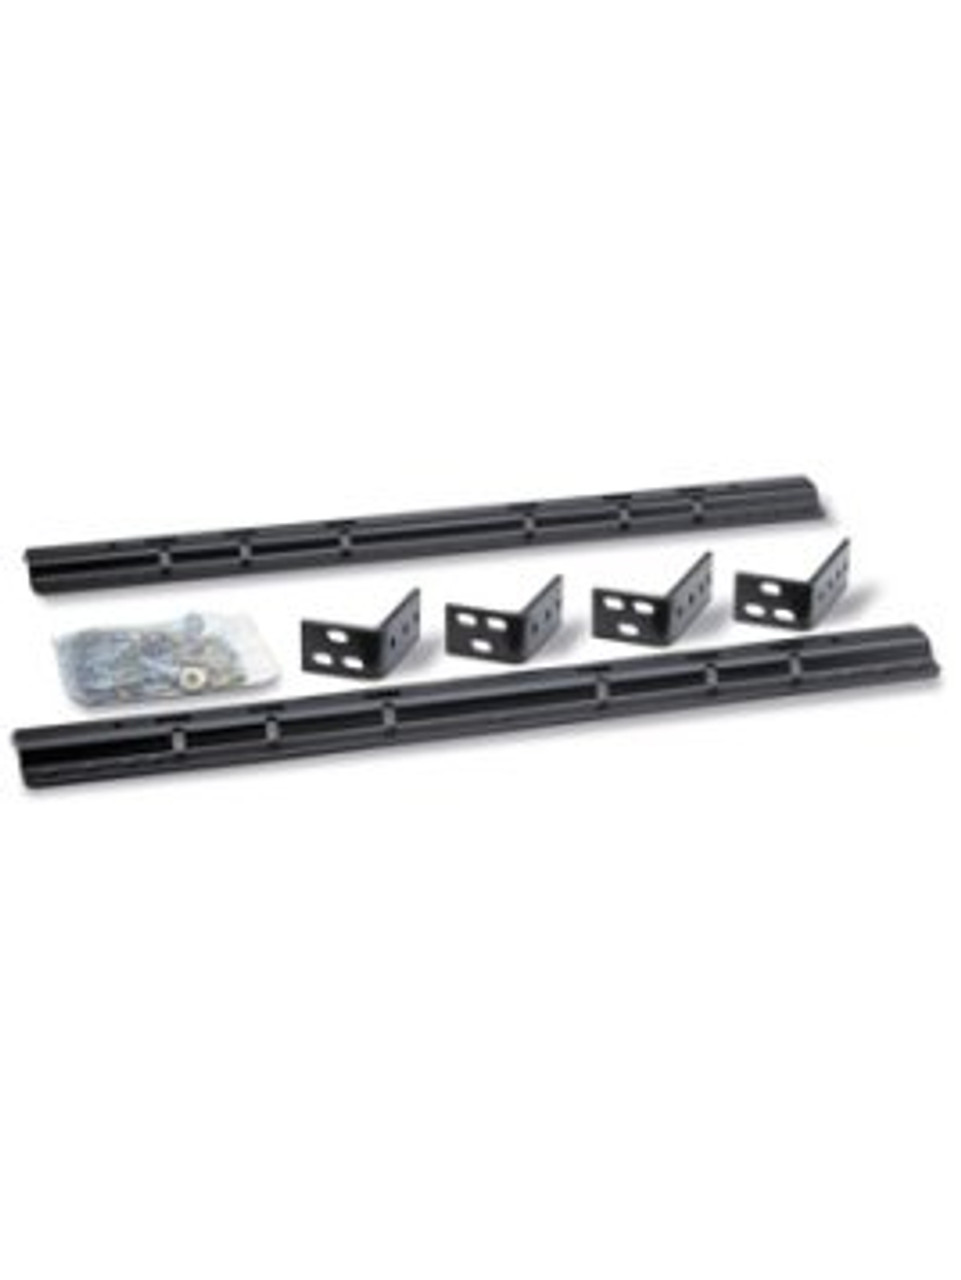 30035 --- Universal Mounting Fifth Wheel Rails and Installation Kit - 10 Bolt Design